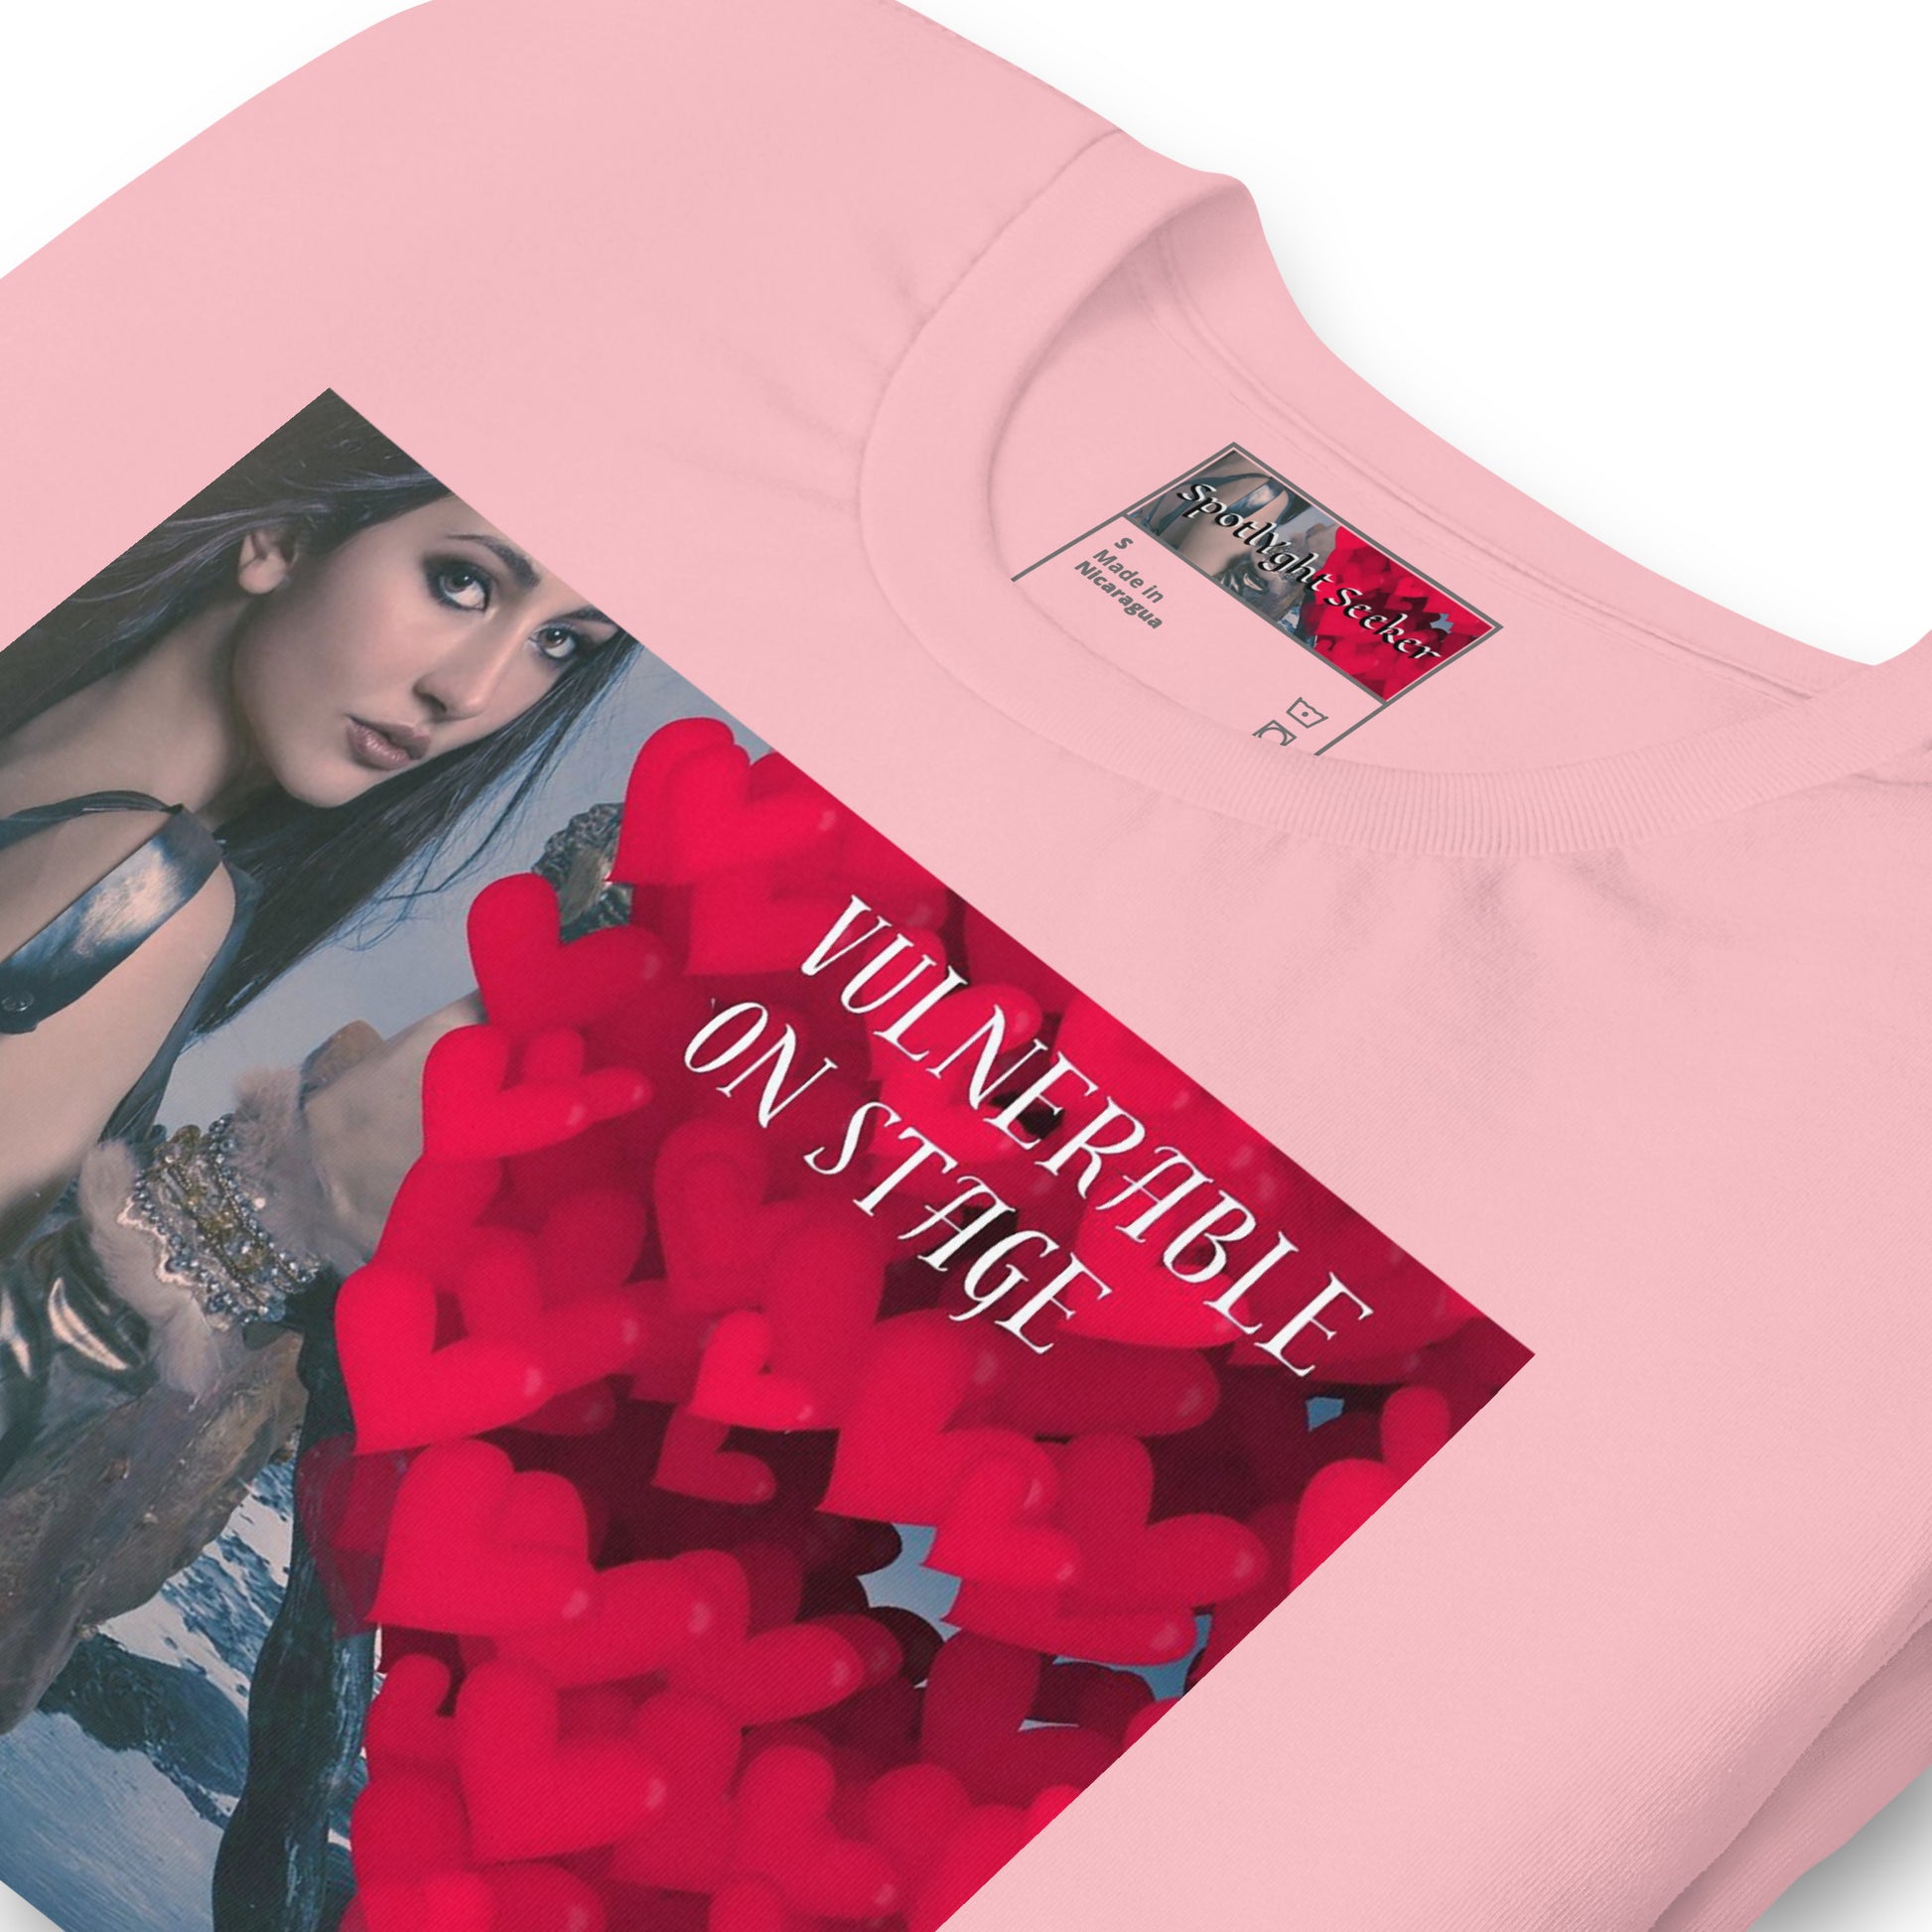 BRFA ROSE Vulnerable Artist Unisex Tee - Embrace authenticity and shield yourself from judgment with our empowering tee. Crush negative vibes and own your spotlight with every wear. Pink